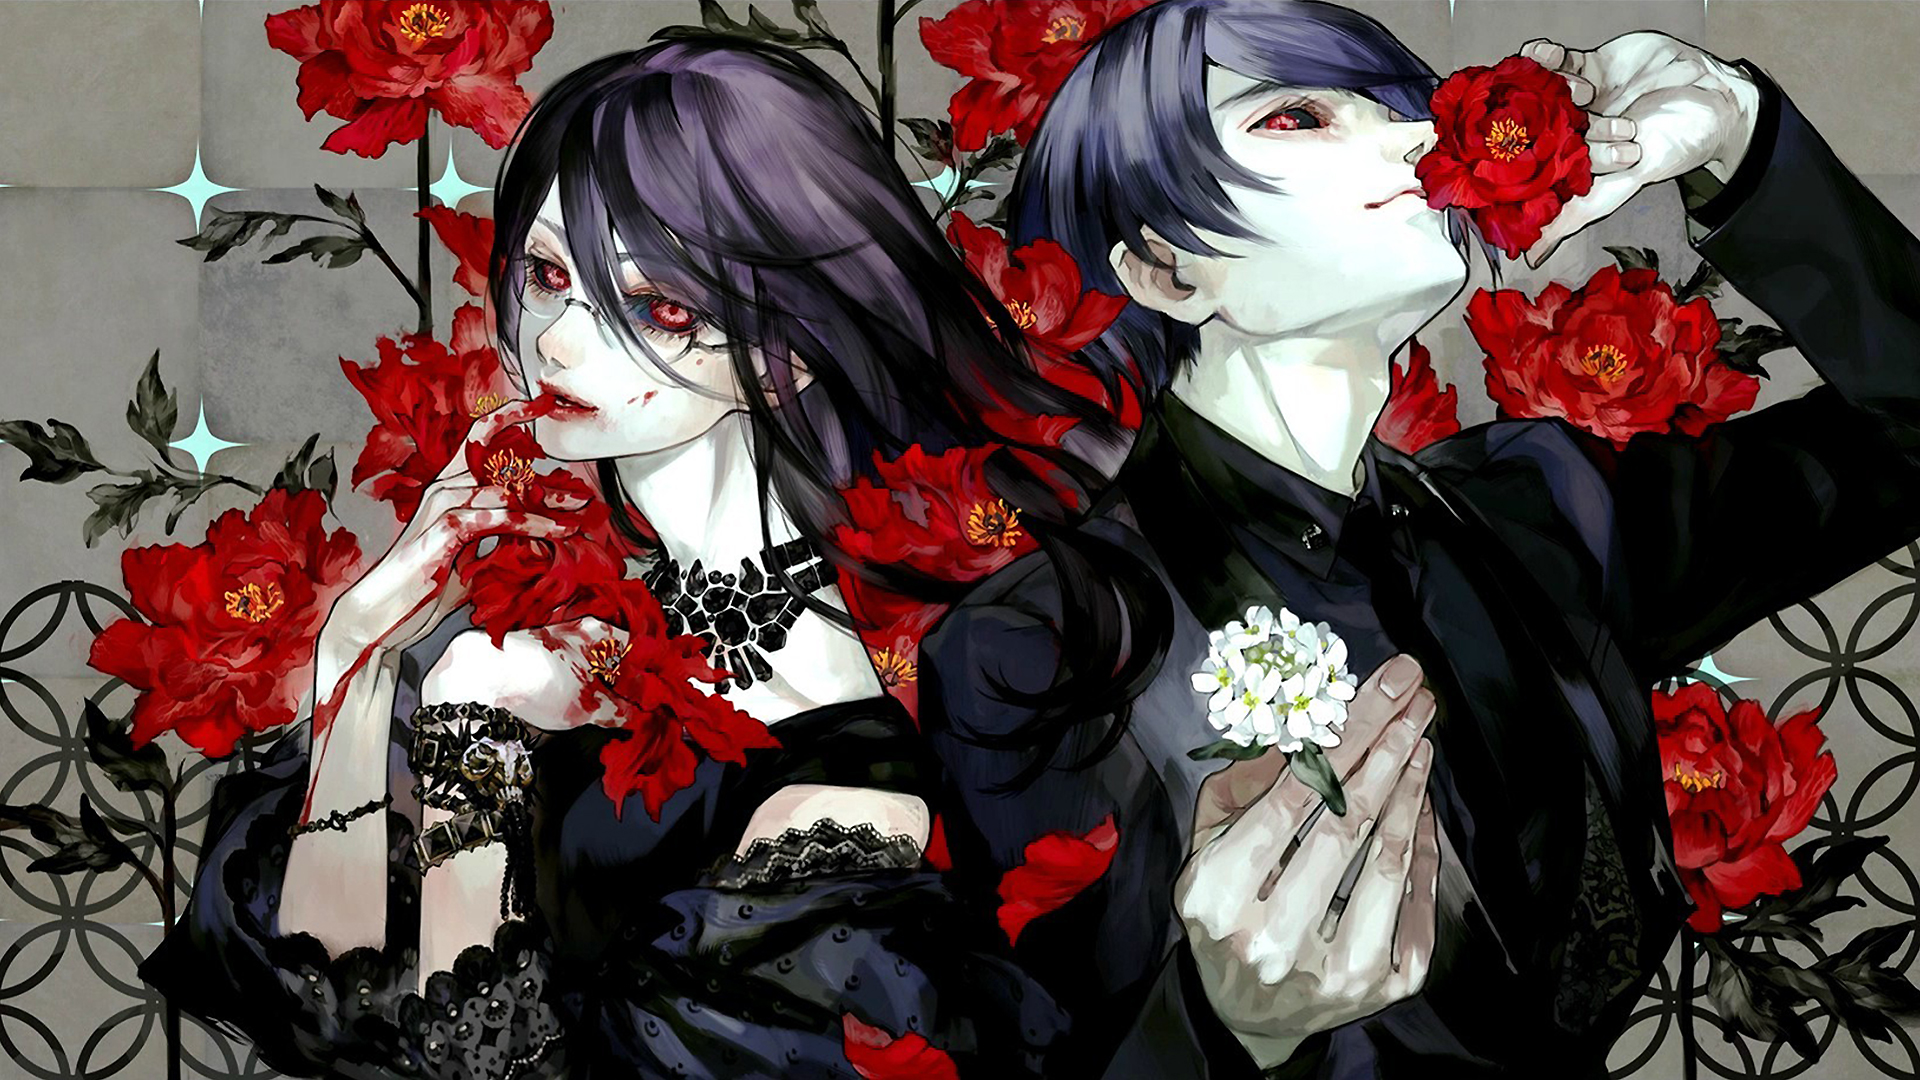 The Best High Quality Tokyo Ghoul HD Wallpaper Is